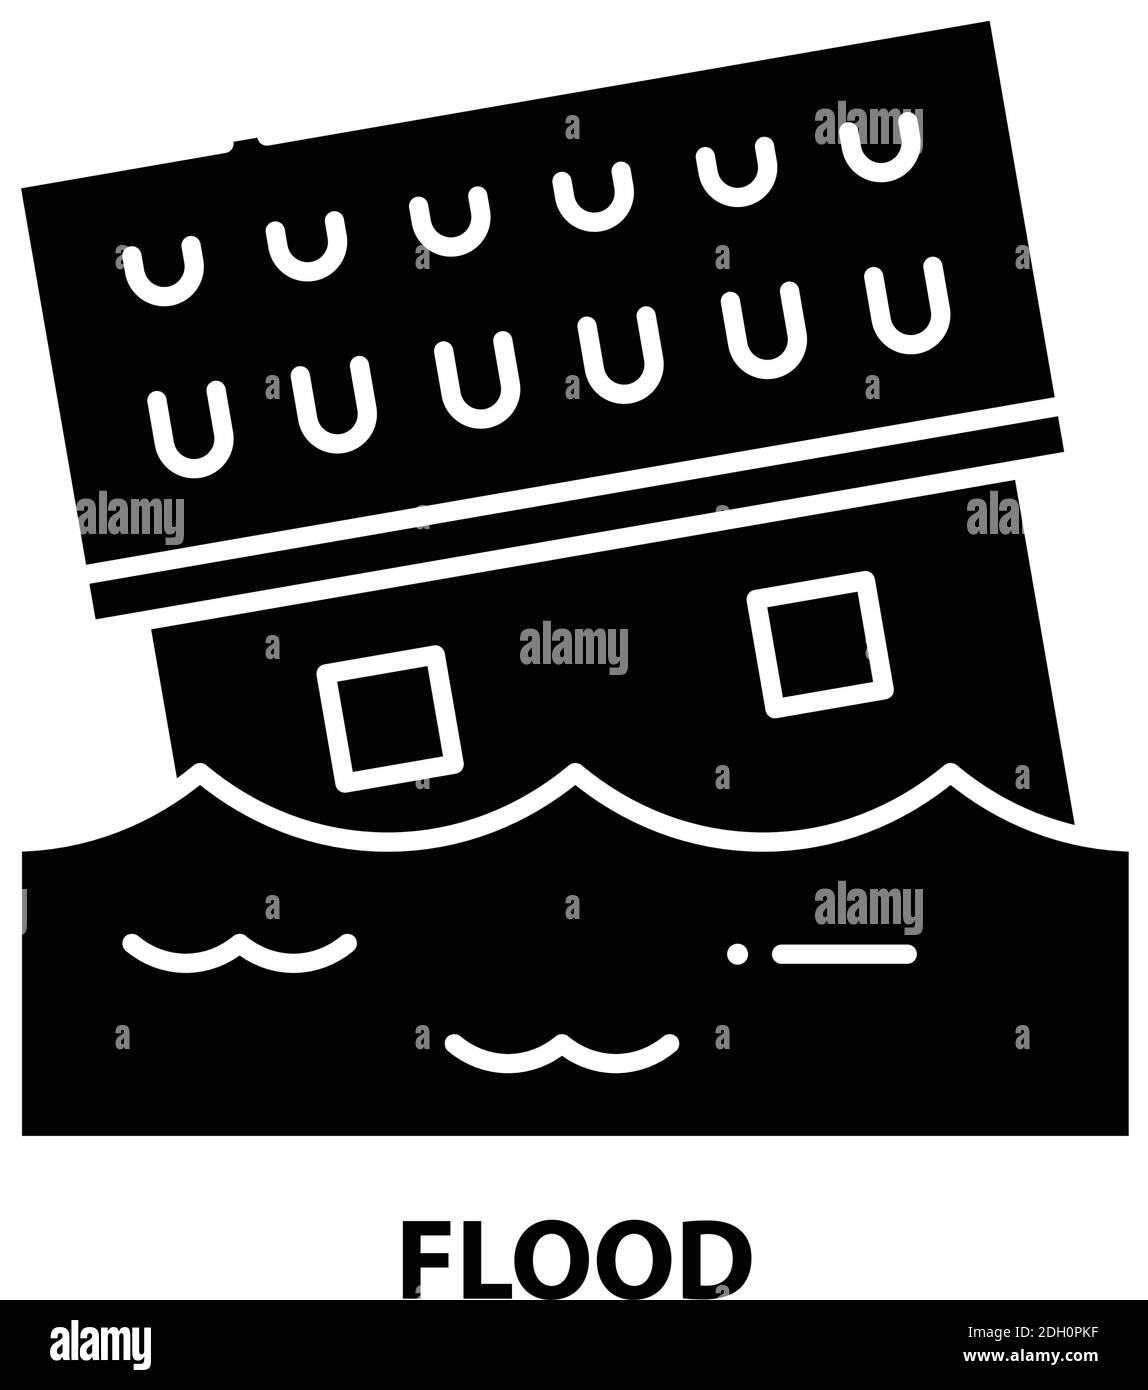 flood icon, black vector sign with editable strokes, concept illustration Stock Vector